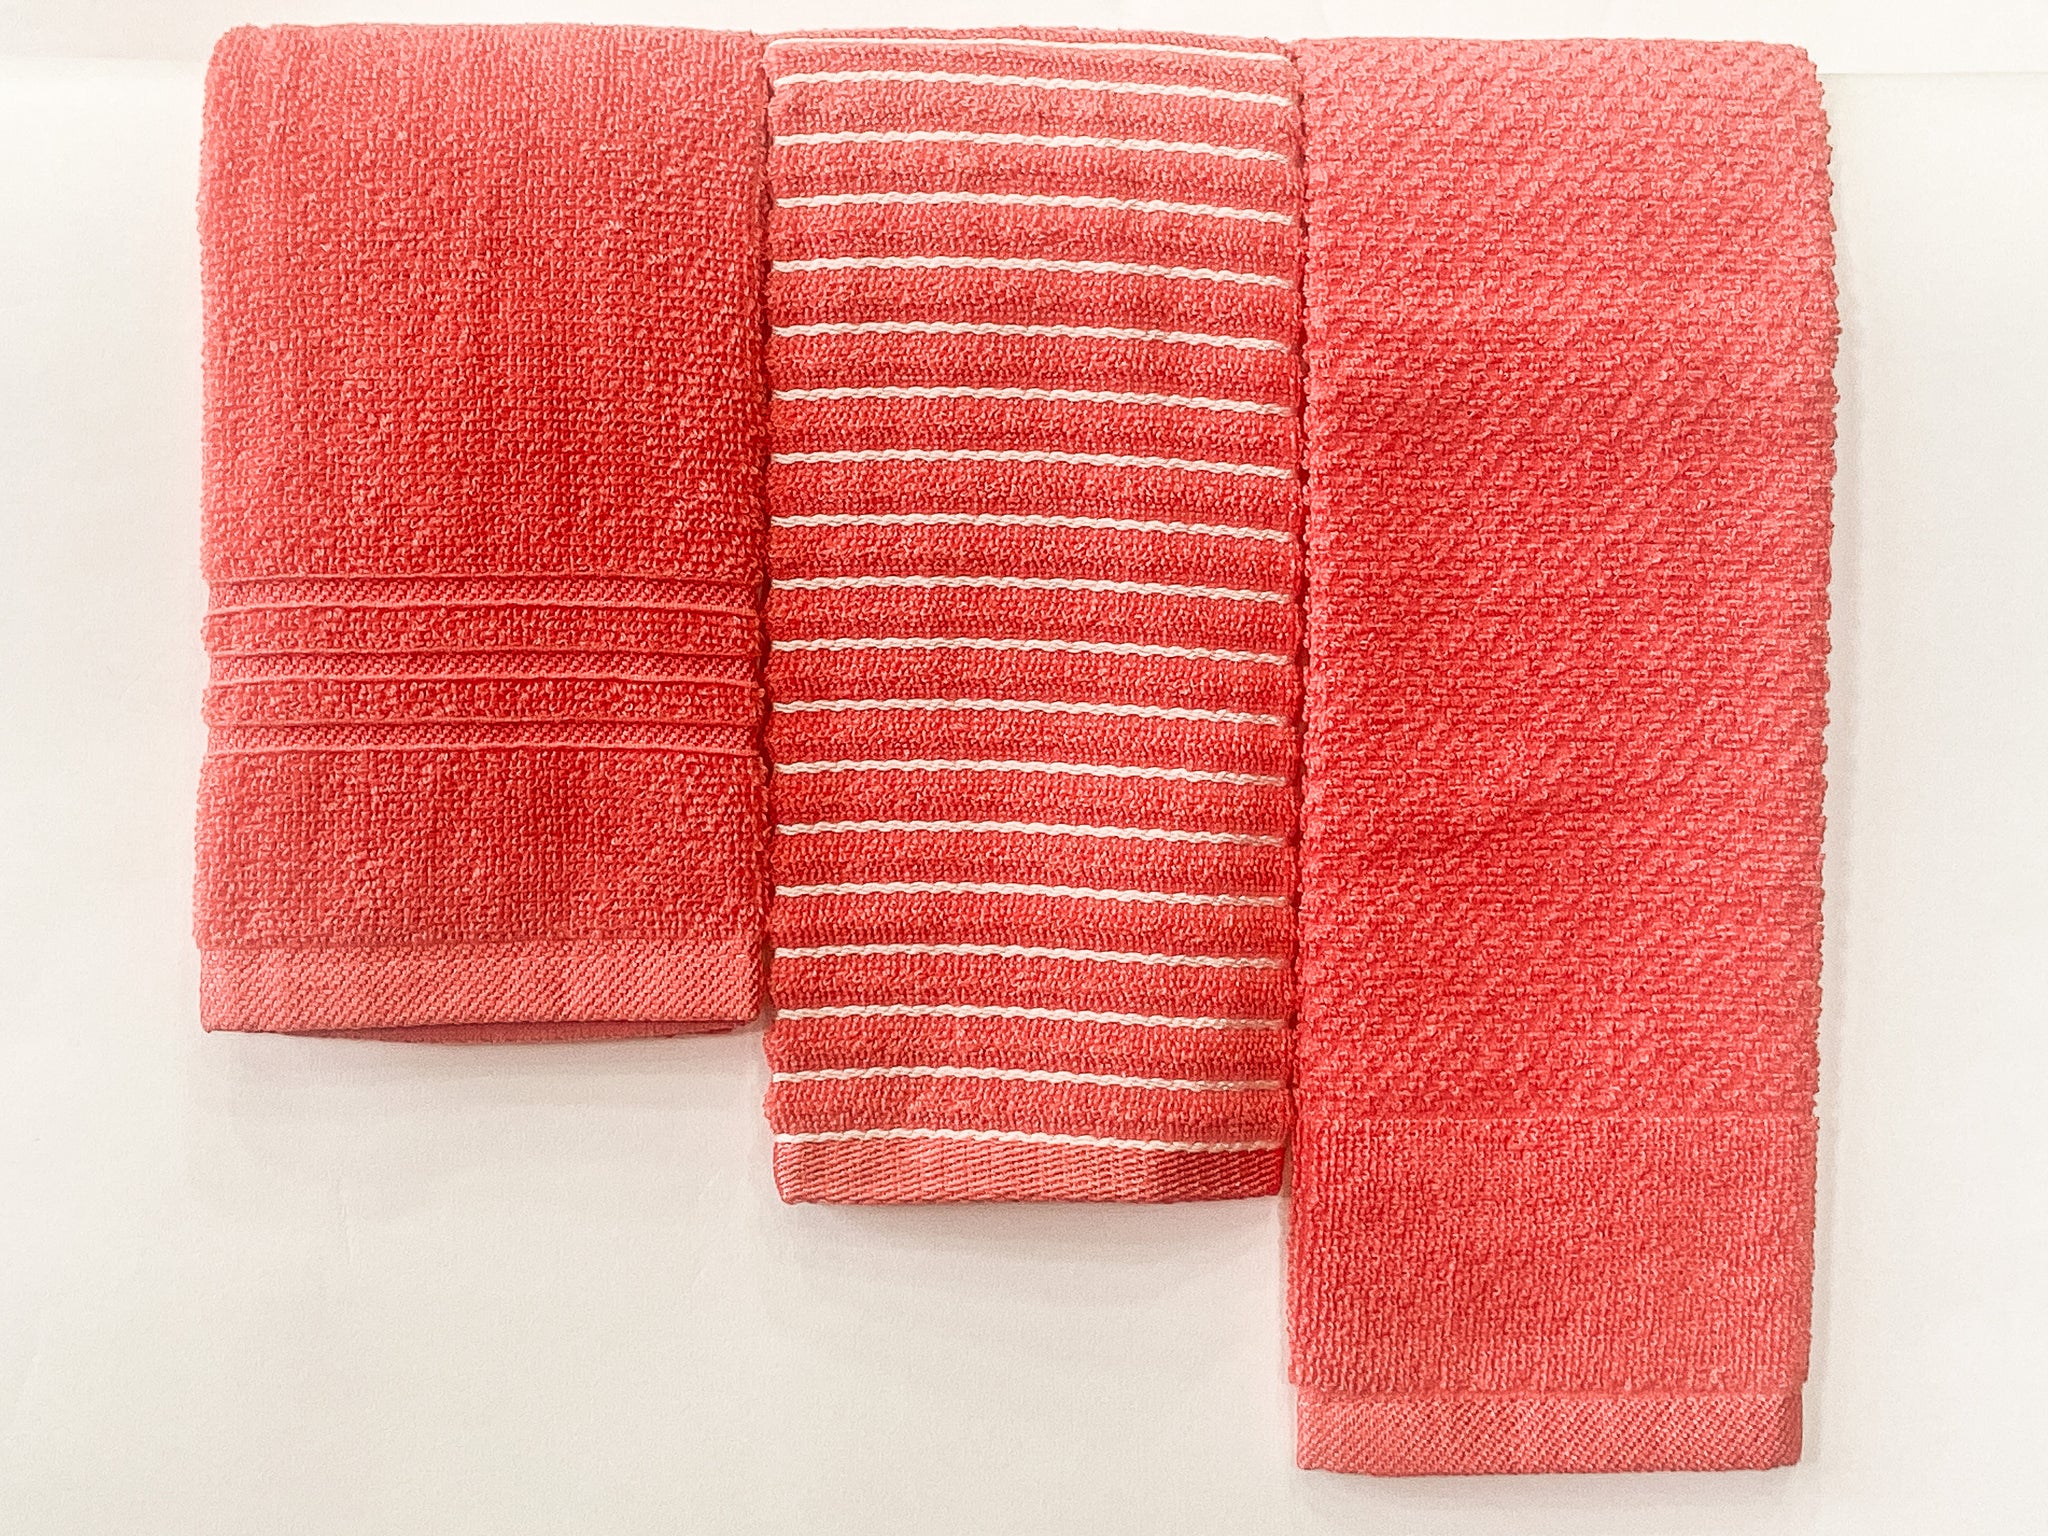 Lushomes Cotton Kitchen Towels, Hand Towel Set of 6, Napkin for Hand Towels  (Pack of 3, 34 x 51 cms, Coral)